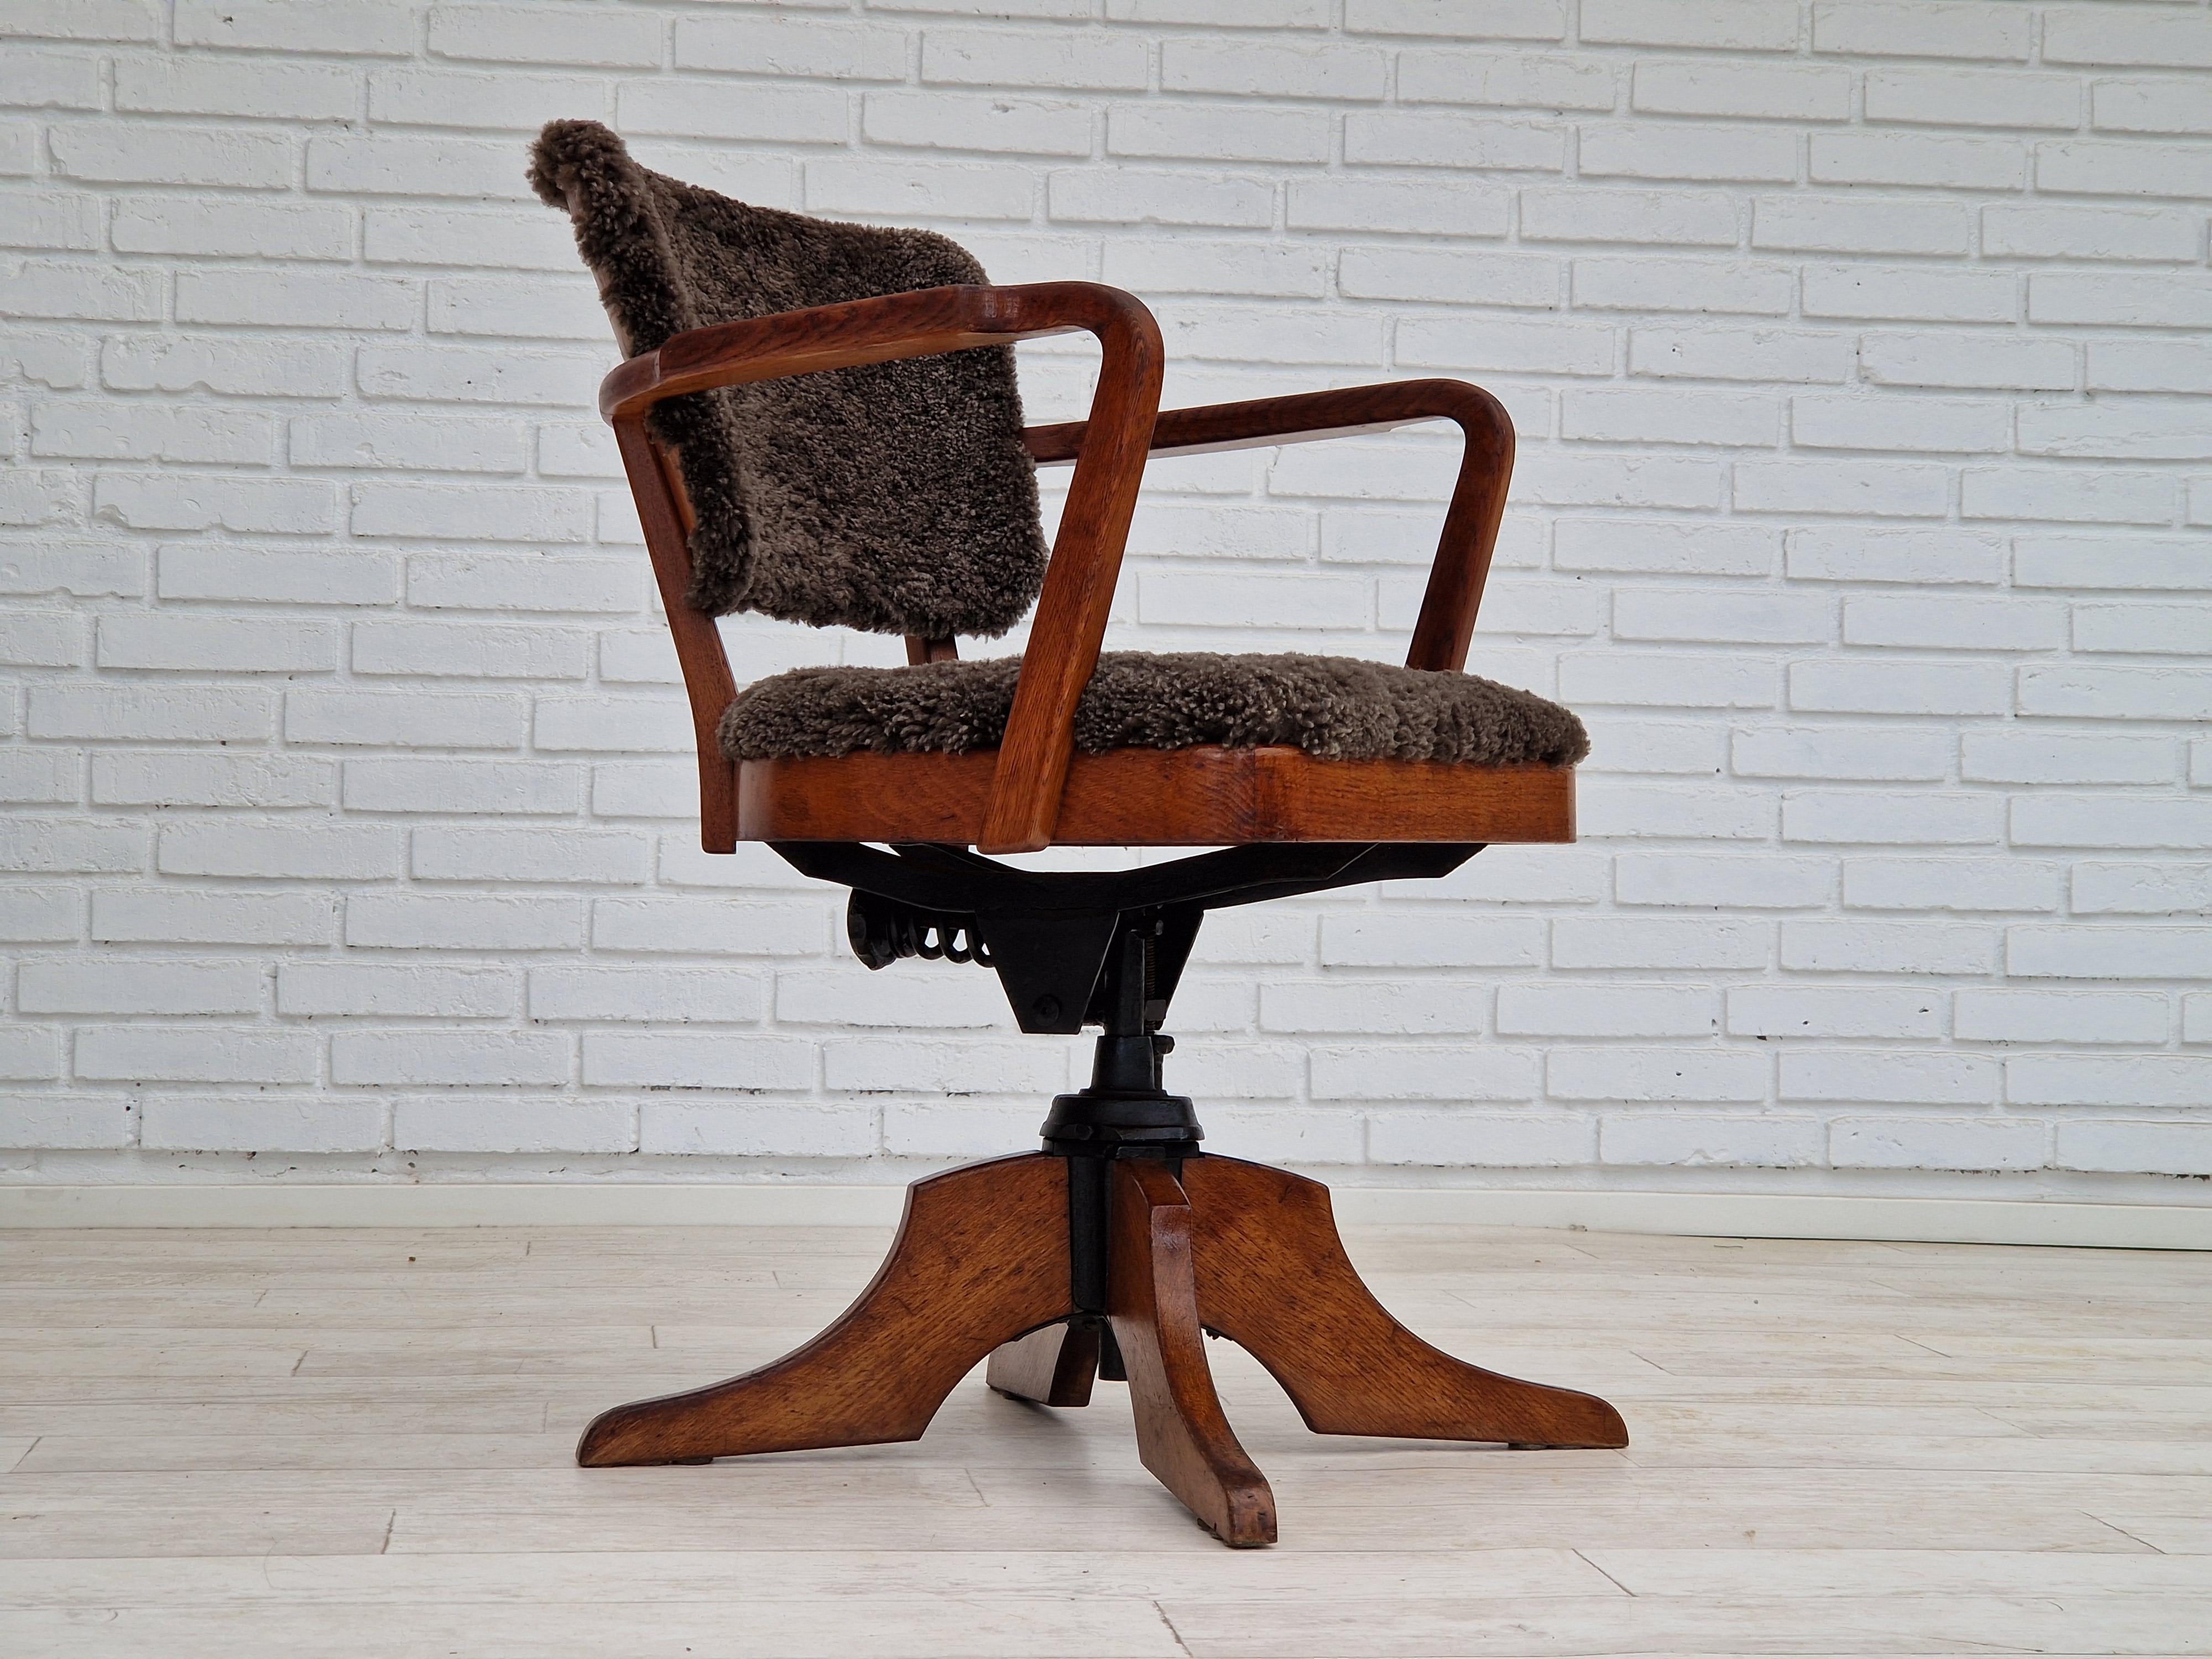 1940s, Danish design, Ehapa swivel chair with tilt function. Reupholstered in New Zealand quality charocal/brun lambskin. Renewed oak wood. Restored by professional upholsterer, craftsman.